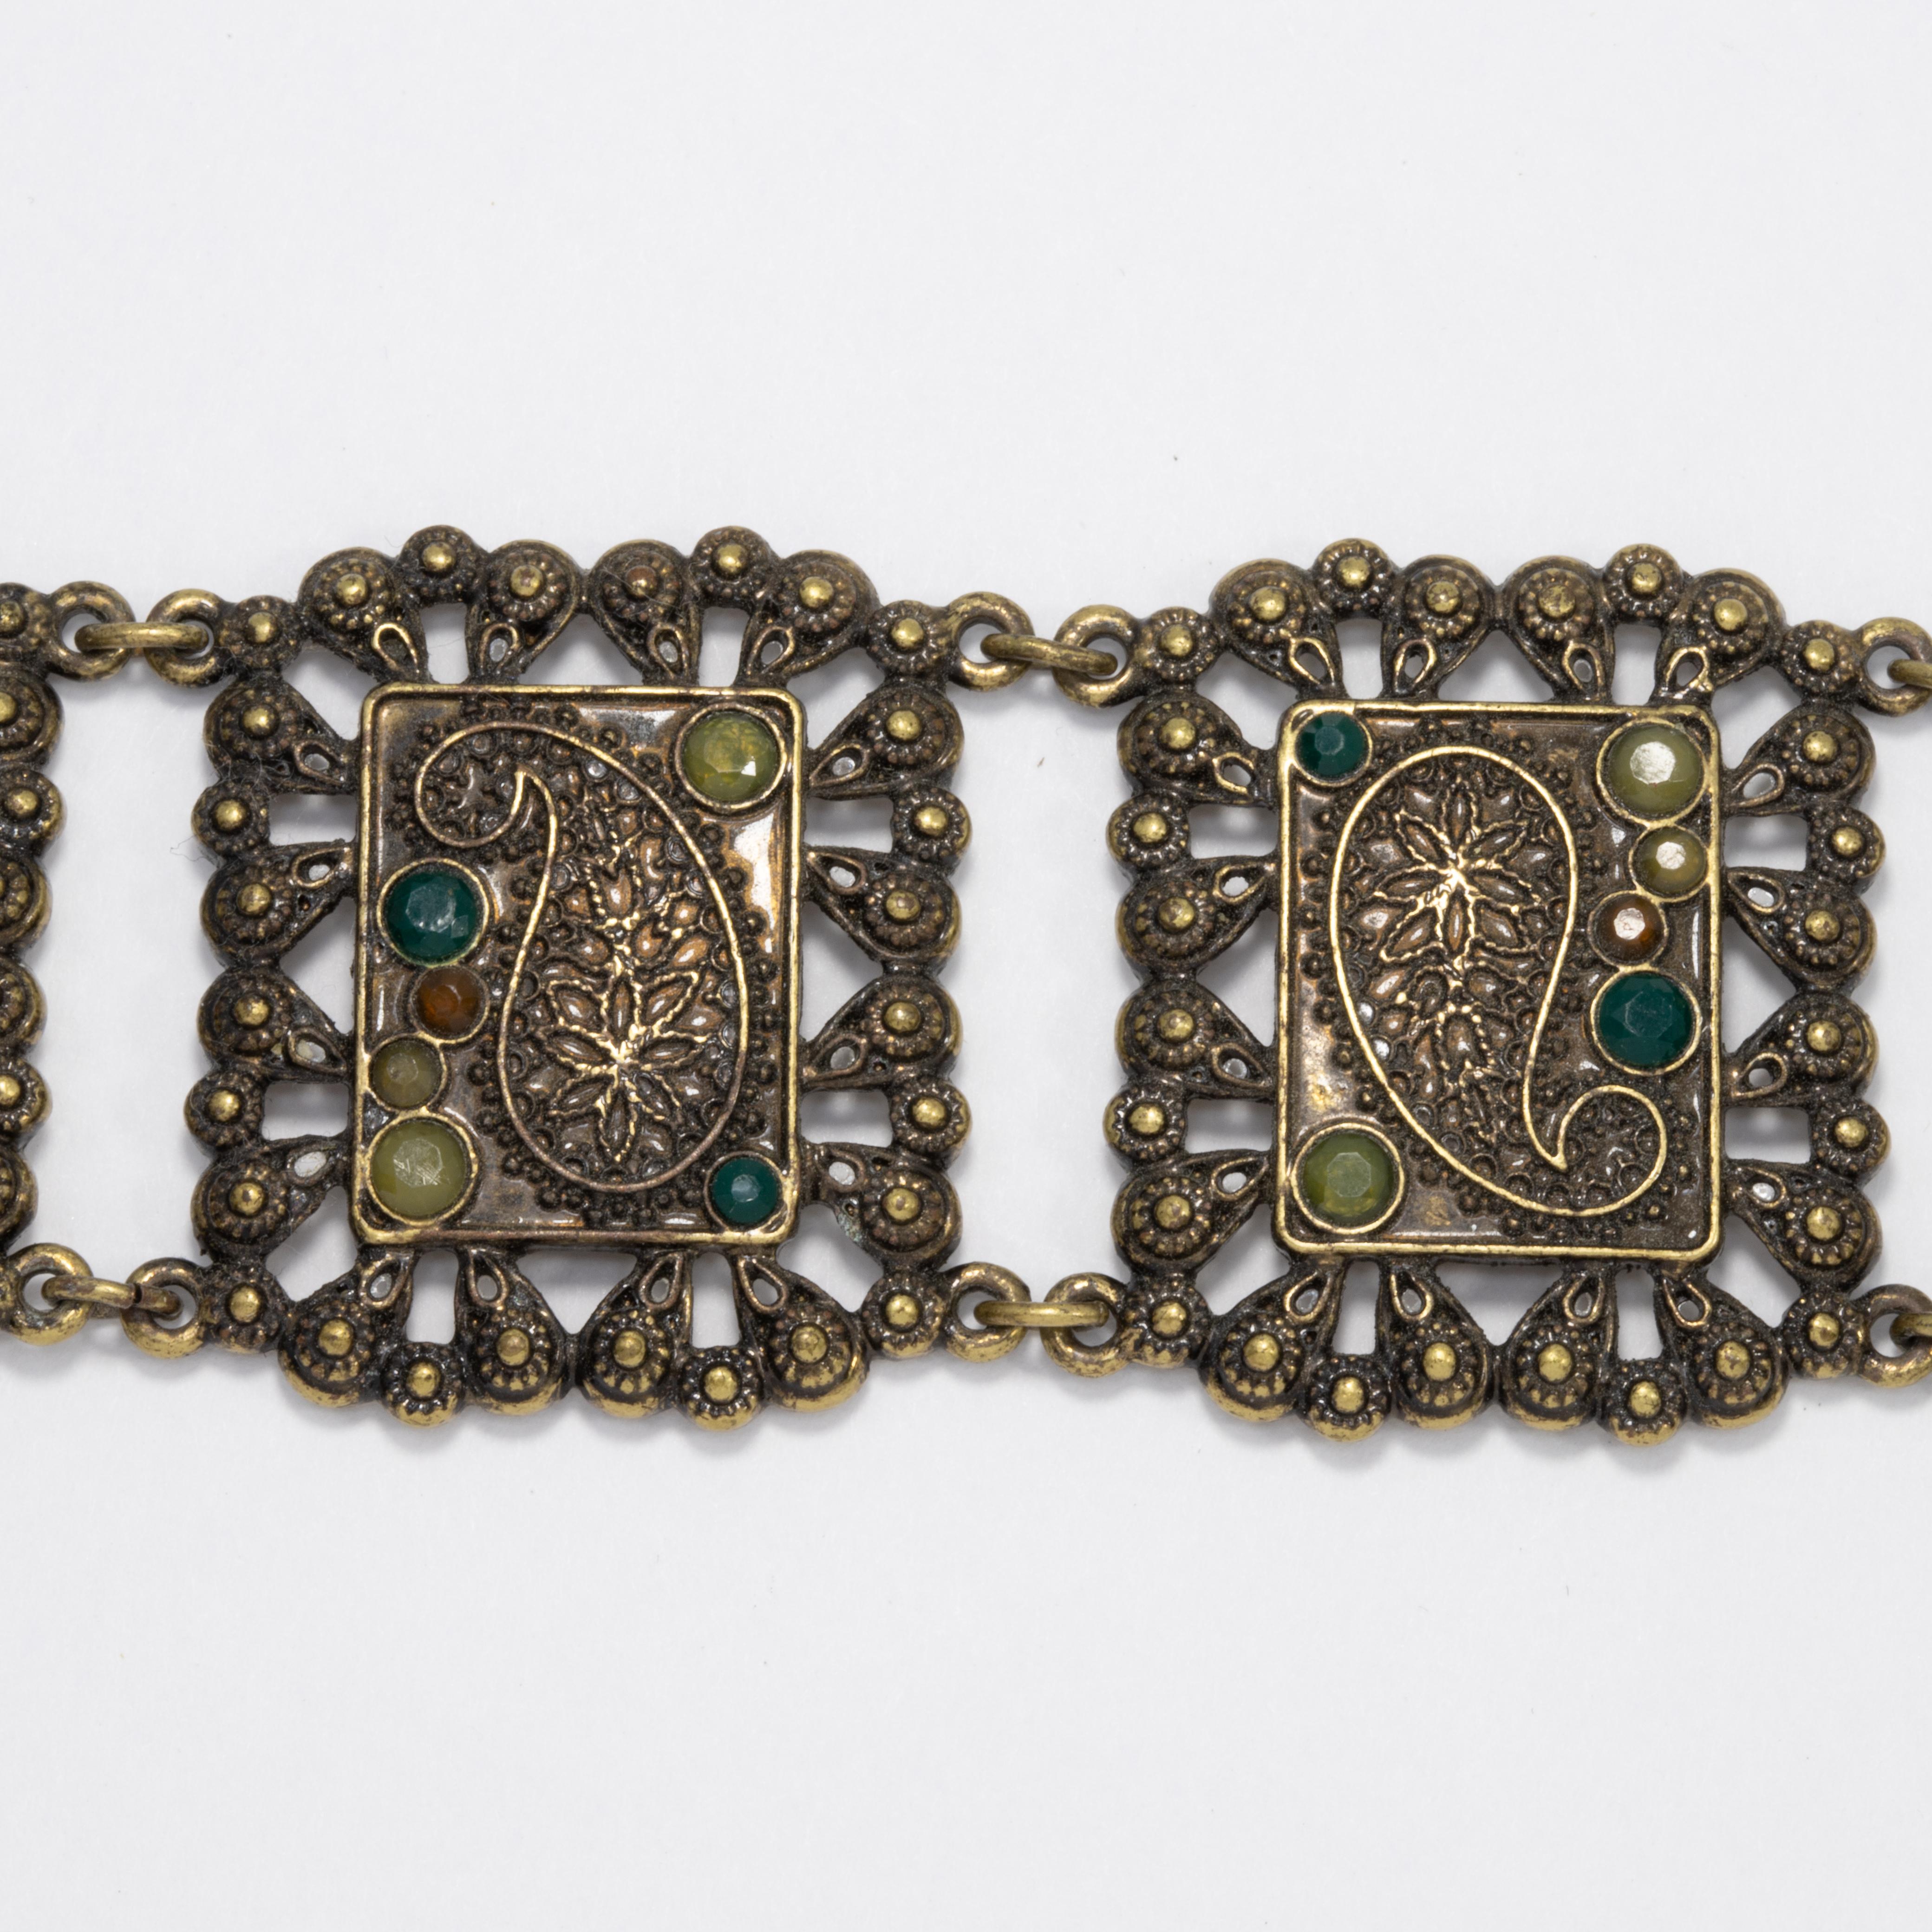 An exquisite vintage bracelet, featuring decorative links with paisley motifs, accented with olivine and emerald crystals.

Brass-tone. Toggle clasp closure.